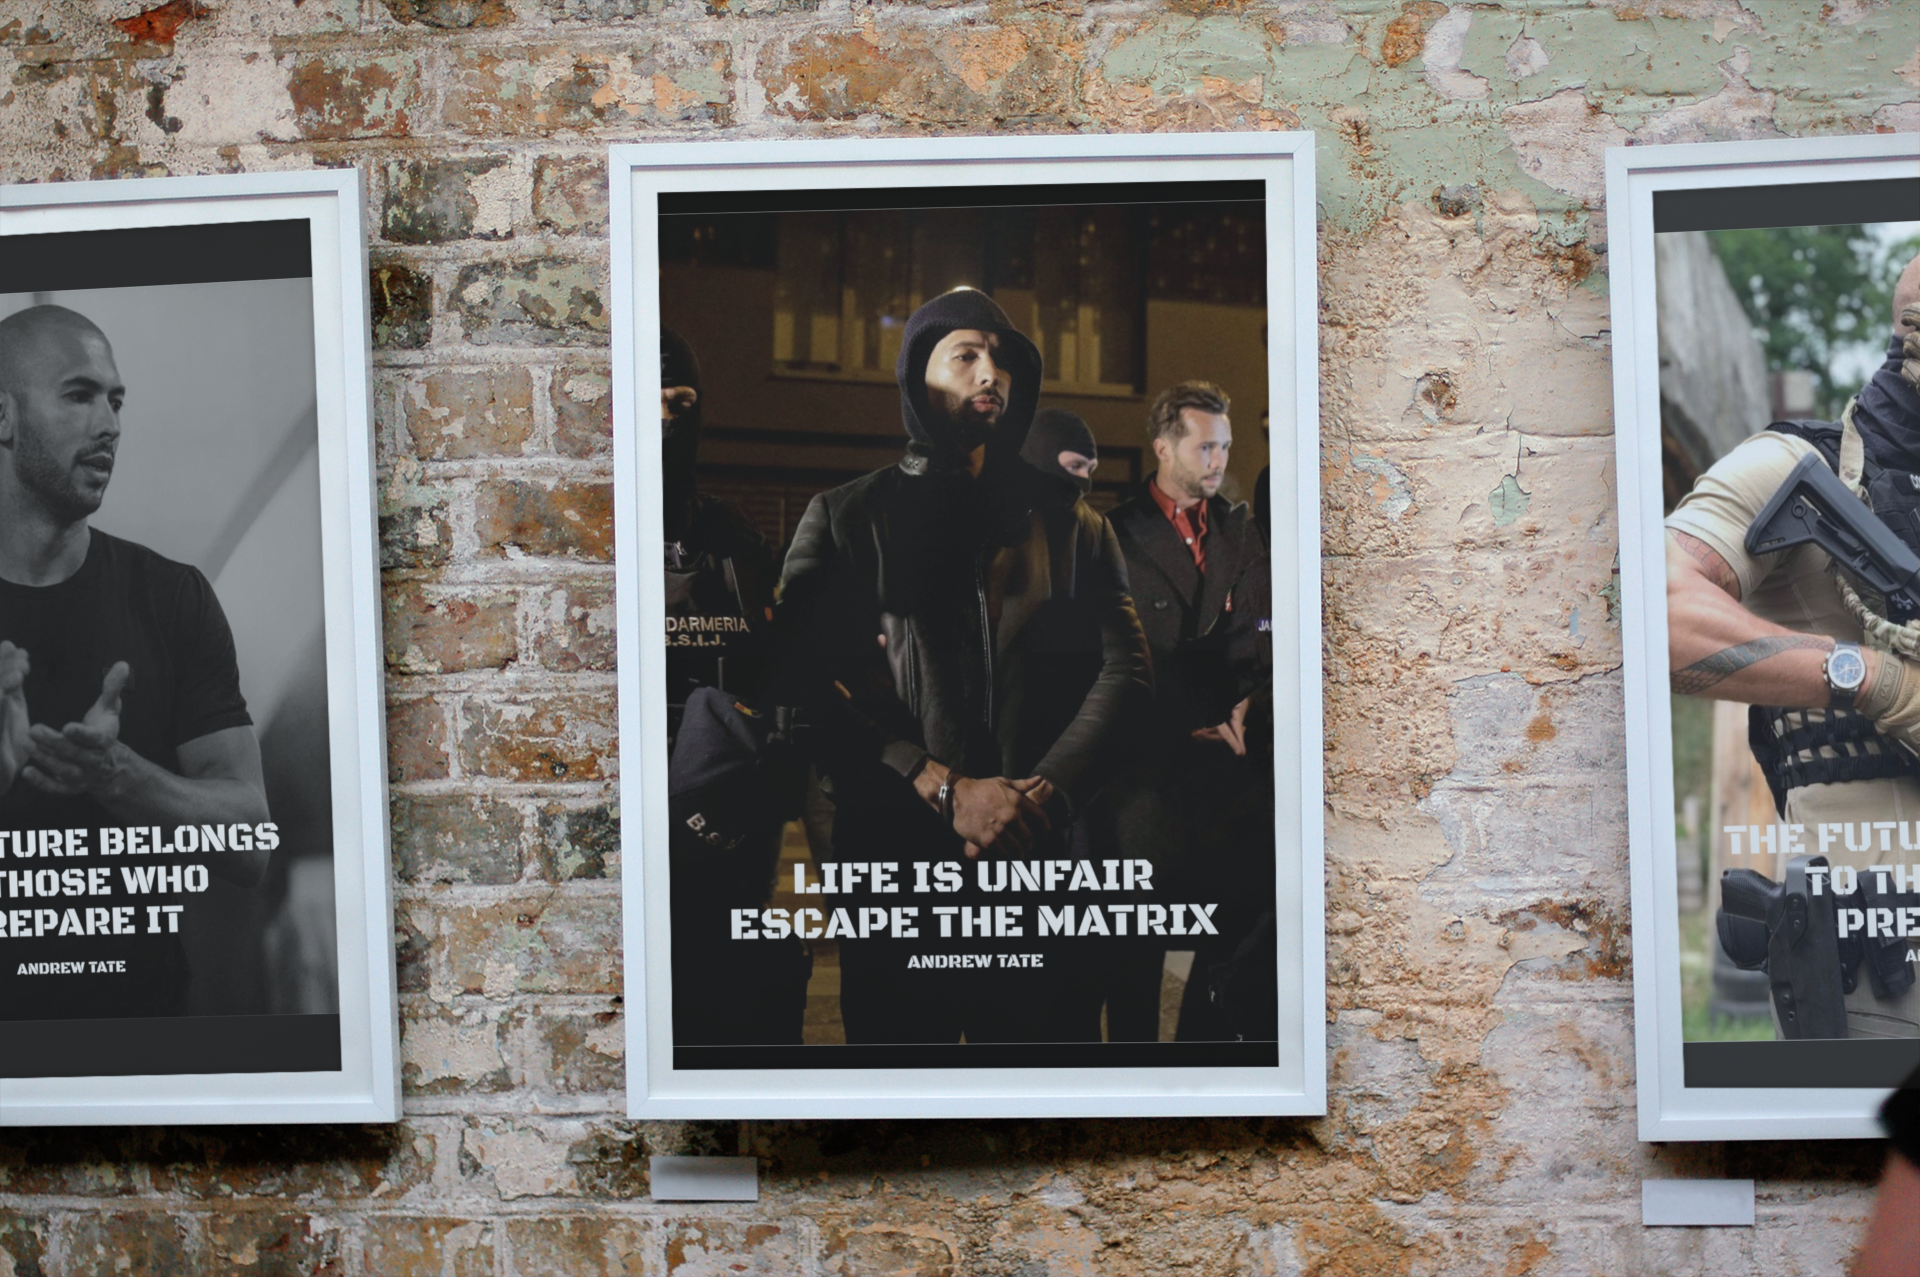 Andrew Tate Motivational Posters "Life is unfair escape the matrix" and Others | Hustler's Inventory | Worldwide | Shop Now